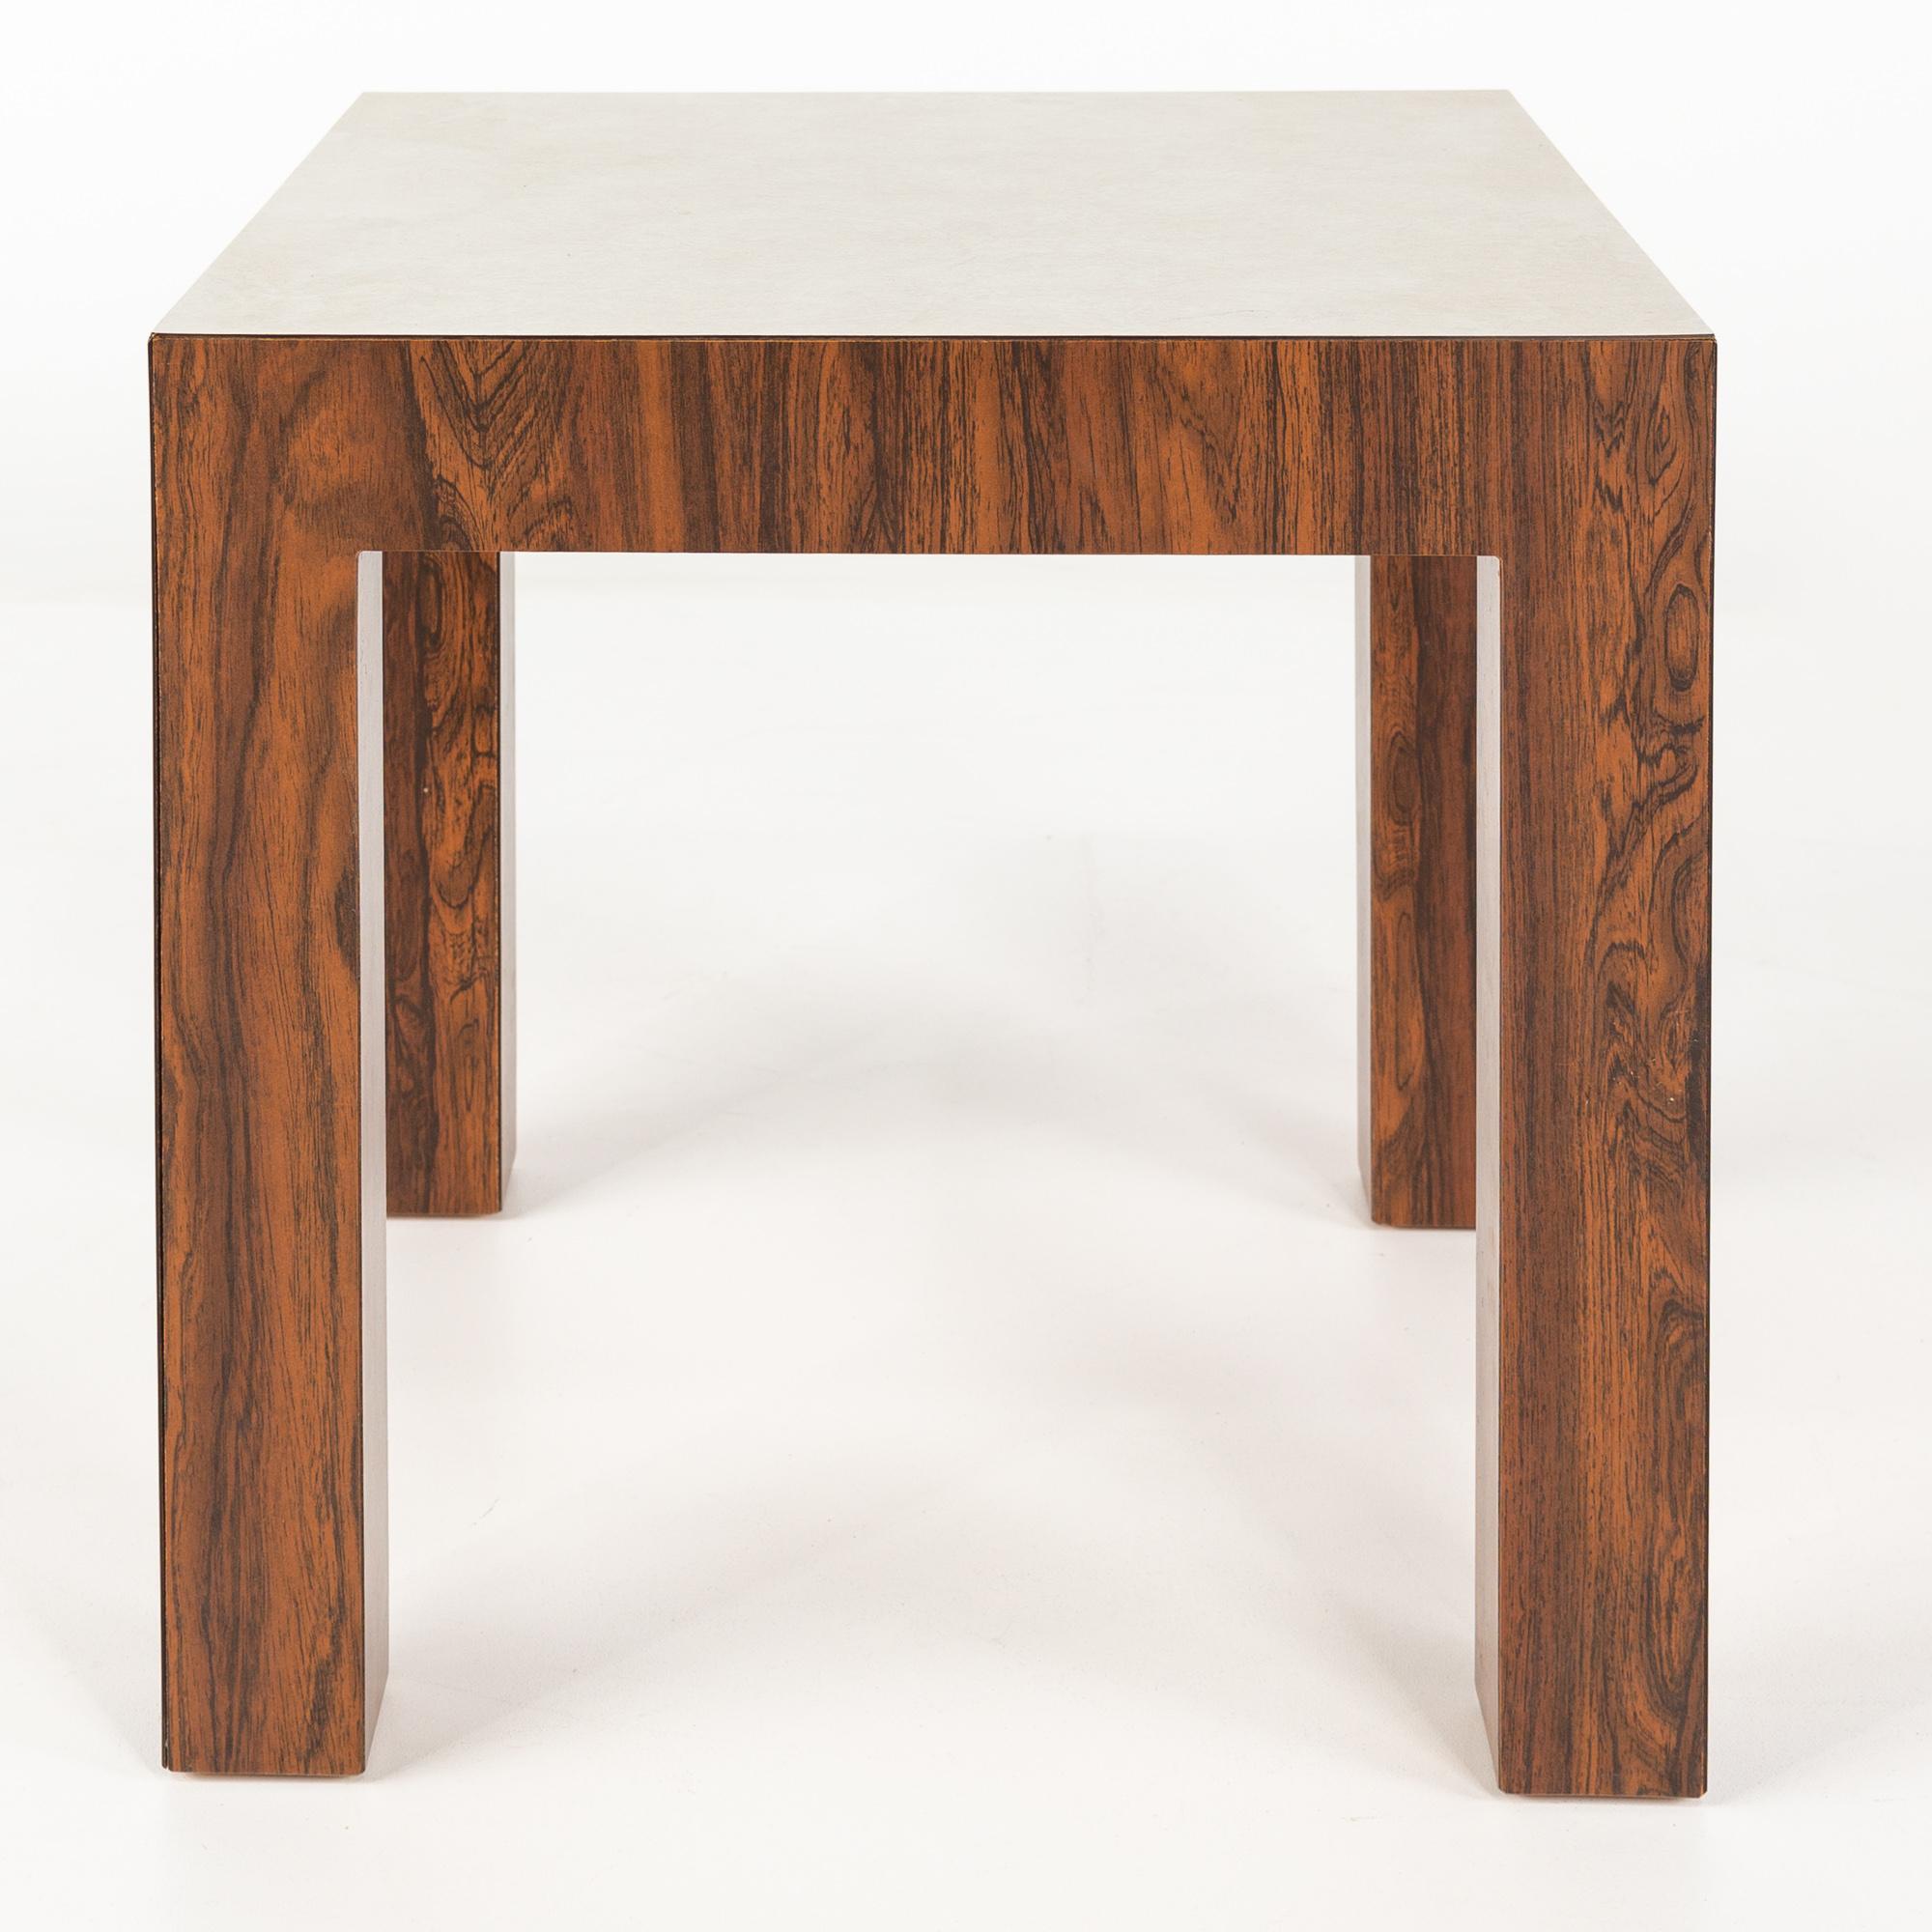 Milo Baughman style mid century rosewood and white laminate side table

This table measures: 20 wide x 20 deep x 19 inches high

All pieces of furniture can be had in what we call restored vintage condition. That means the piece is restored upon